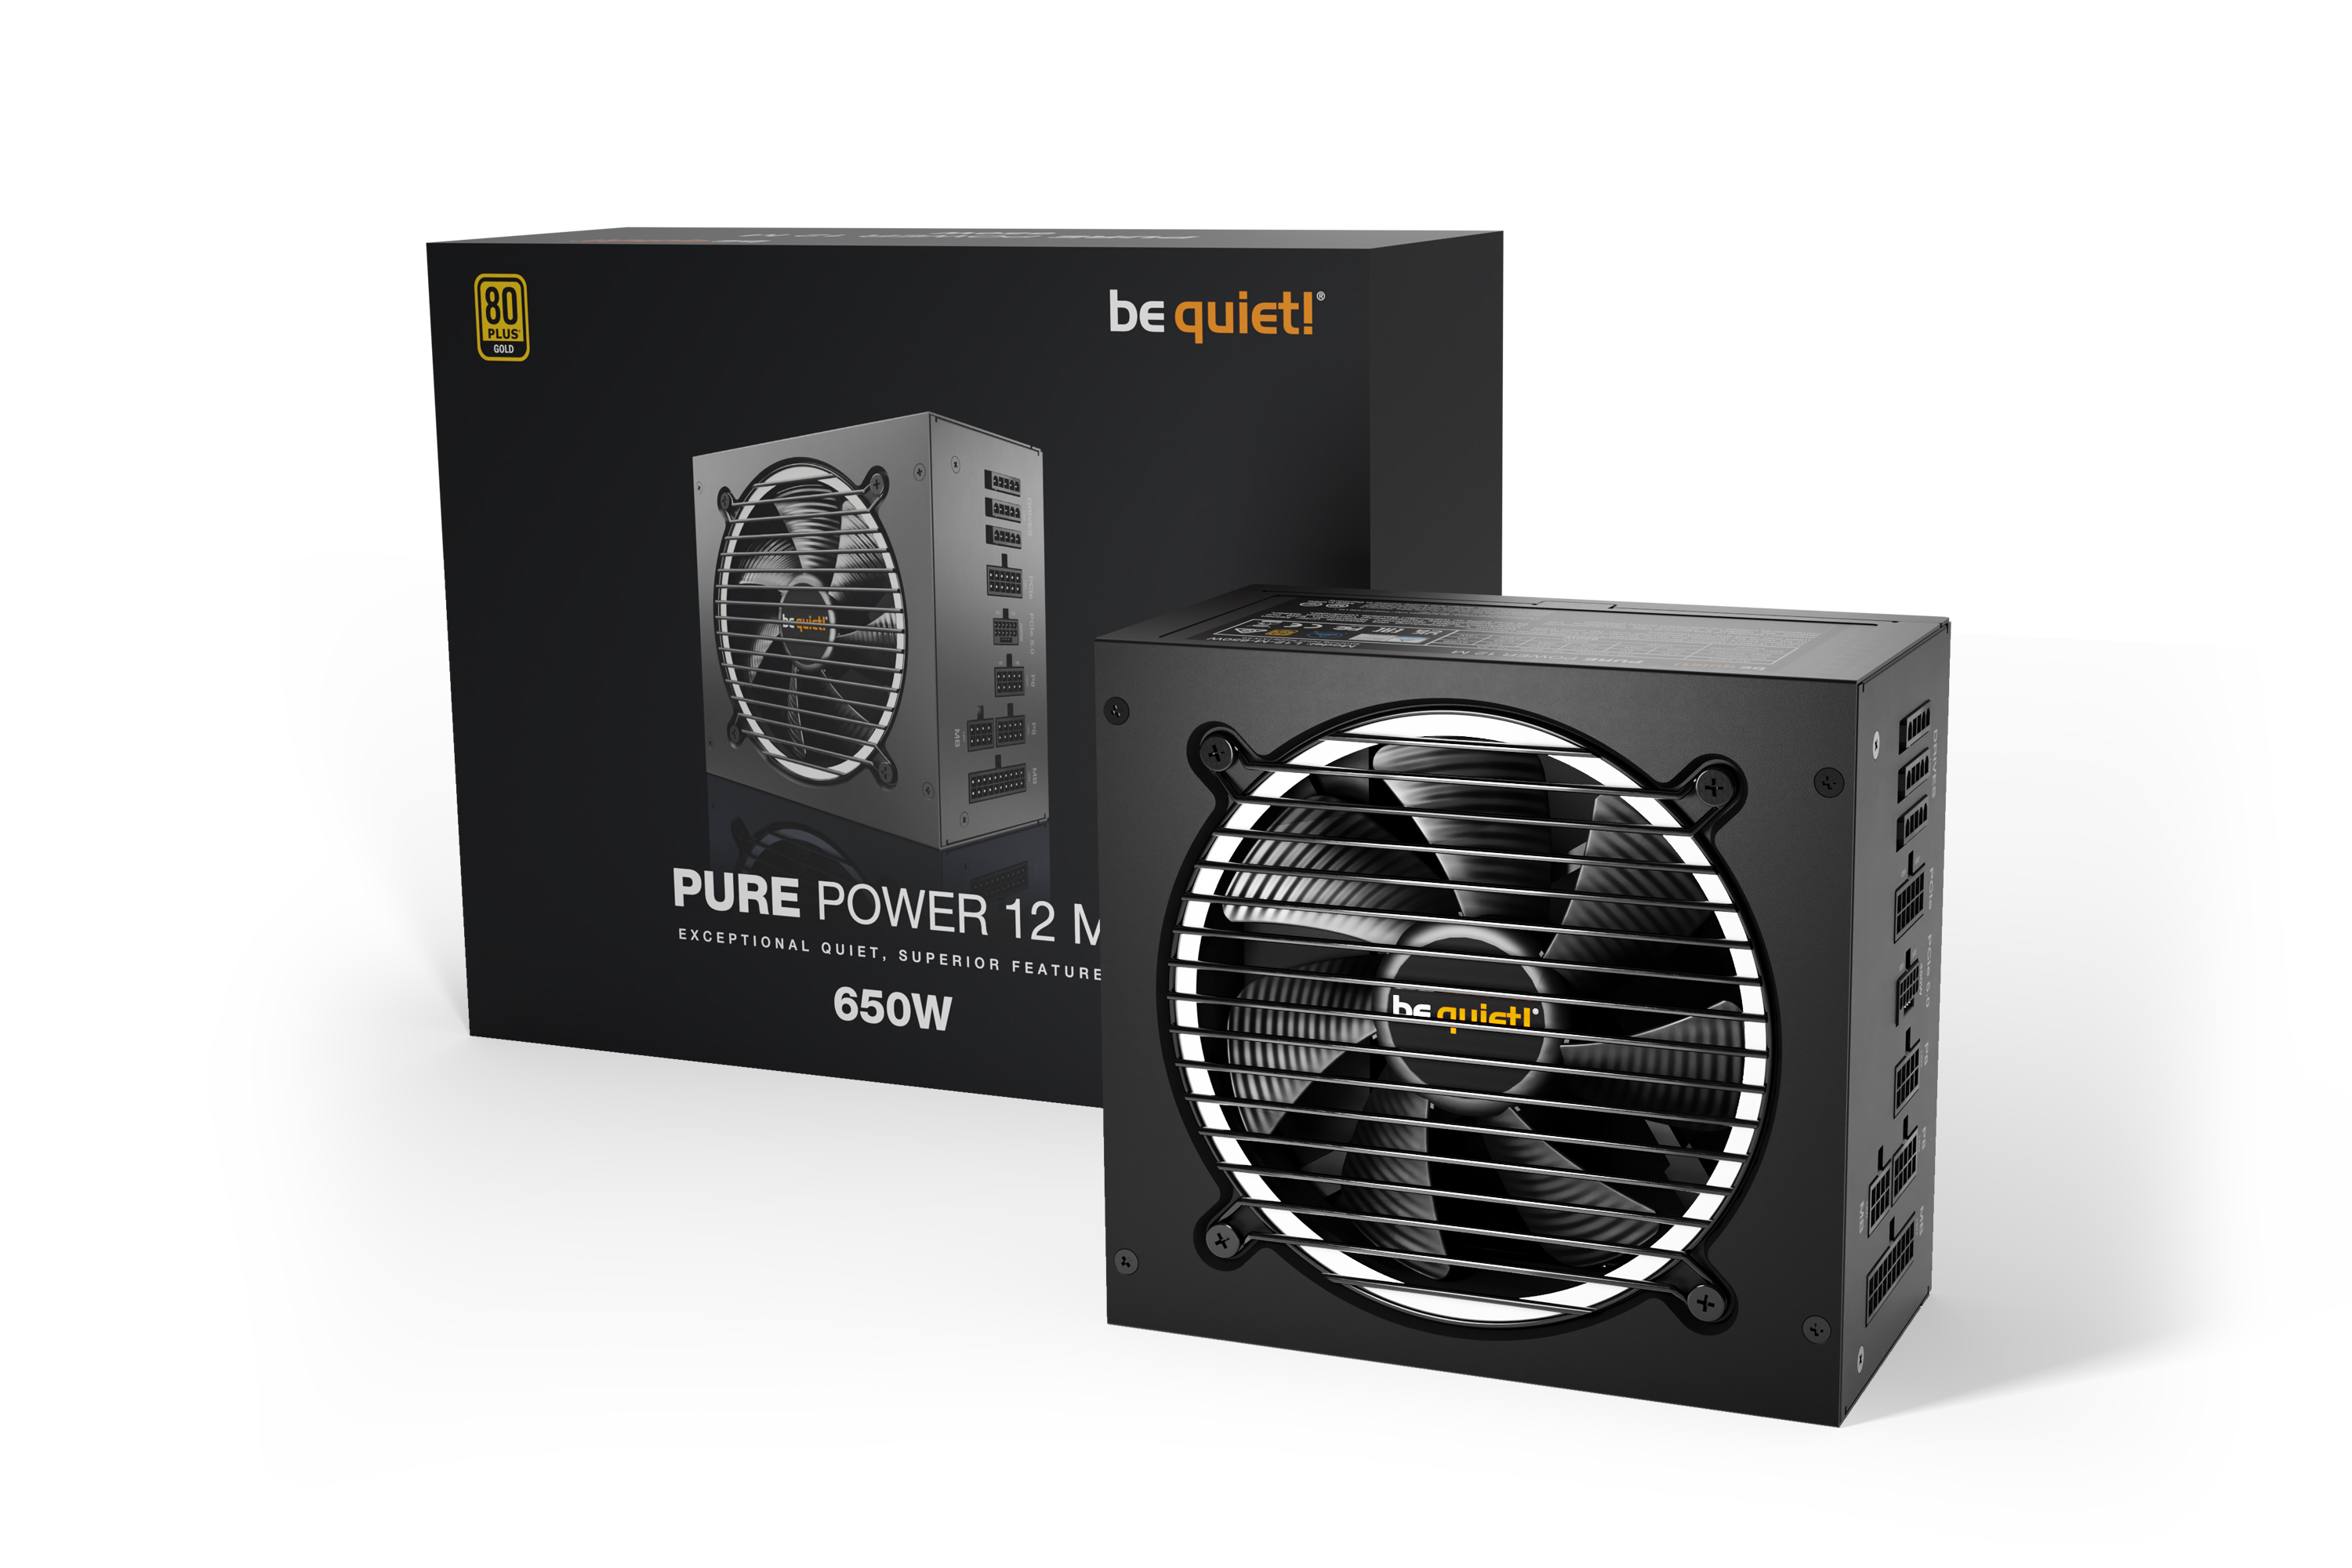   650W be quiet! Pure Power 12 M (BN342)